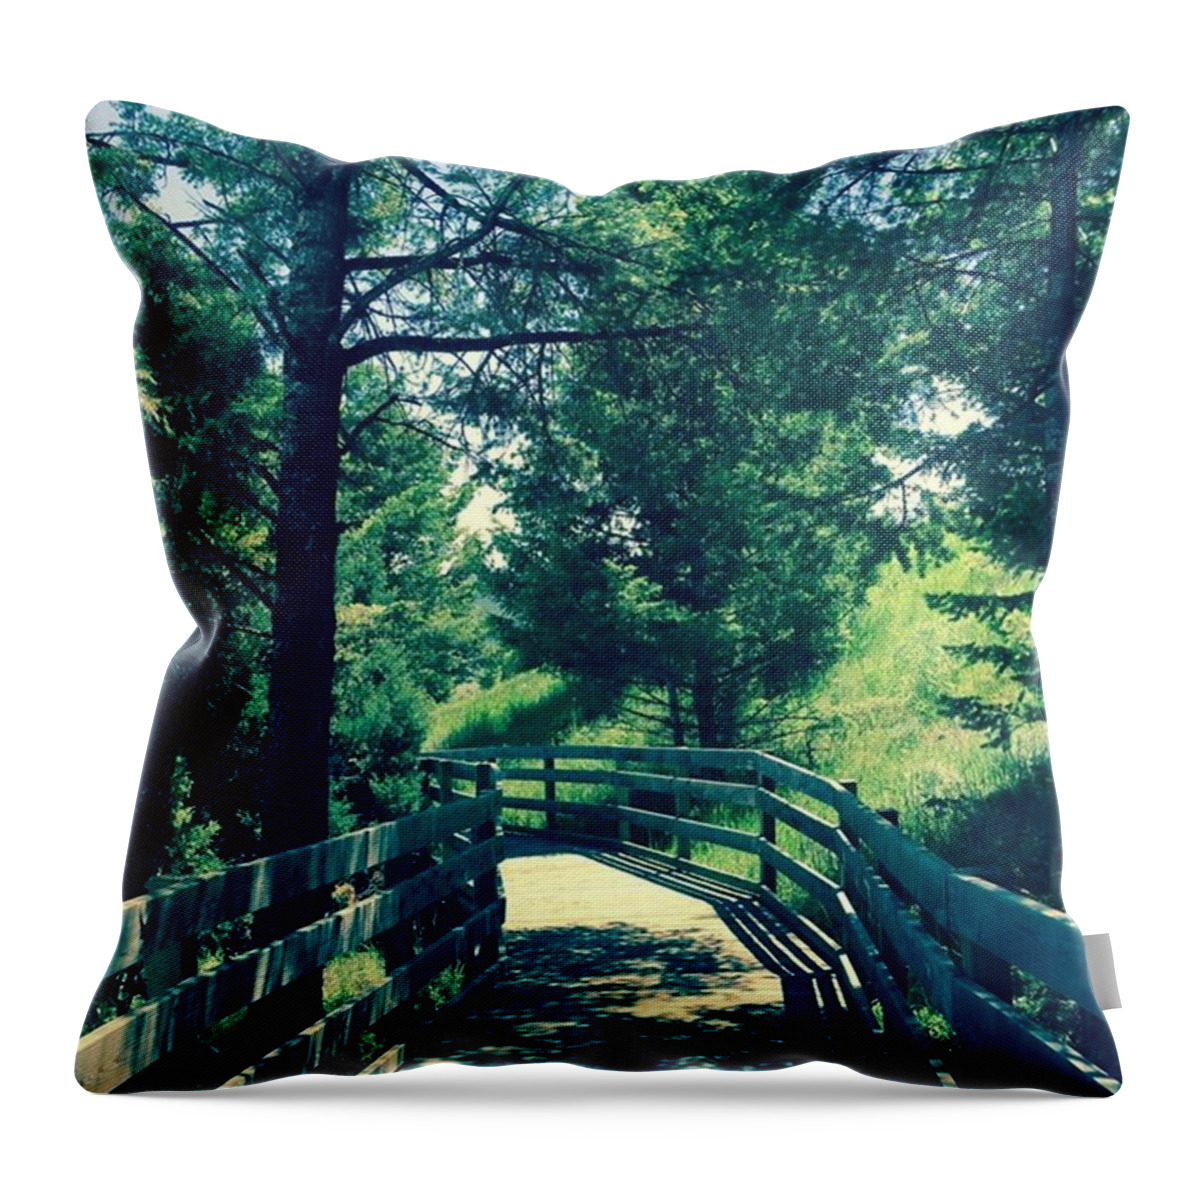 Livingasben Throw Pillow featuring the photograph A Road Of Both Civilization And Nature by Ben Hong